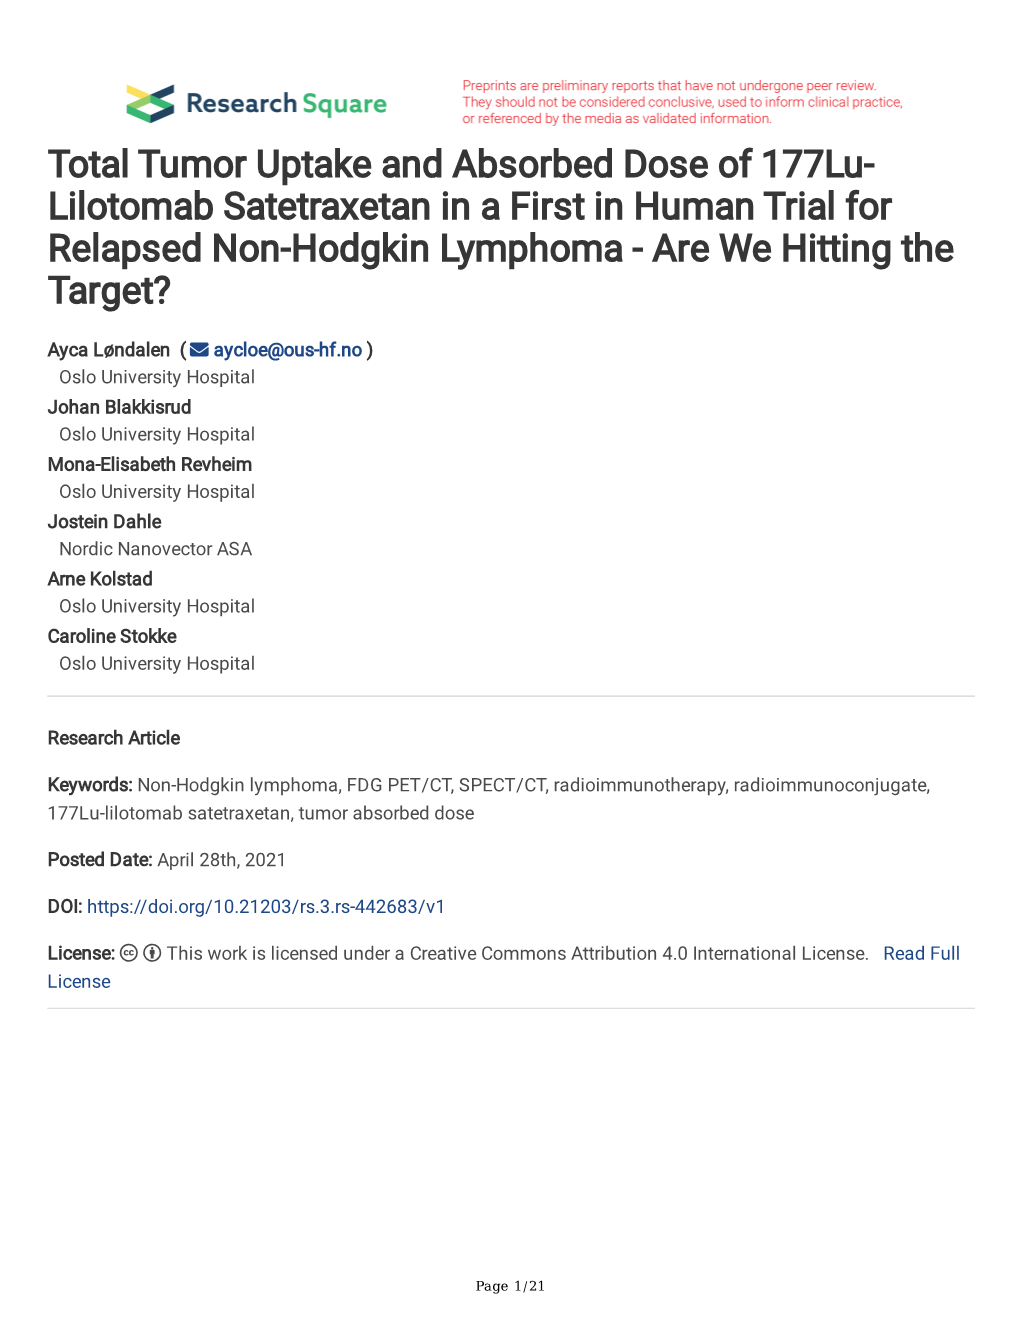 Total Tumor Uptake and Absorbed Dose of 177Lu- Lilotomab Satetraxetan in a First in Human Trial for Relapsed Non-Hodgkin Lymphoma - Are We Hitting the Target?